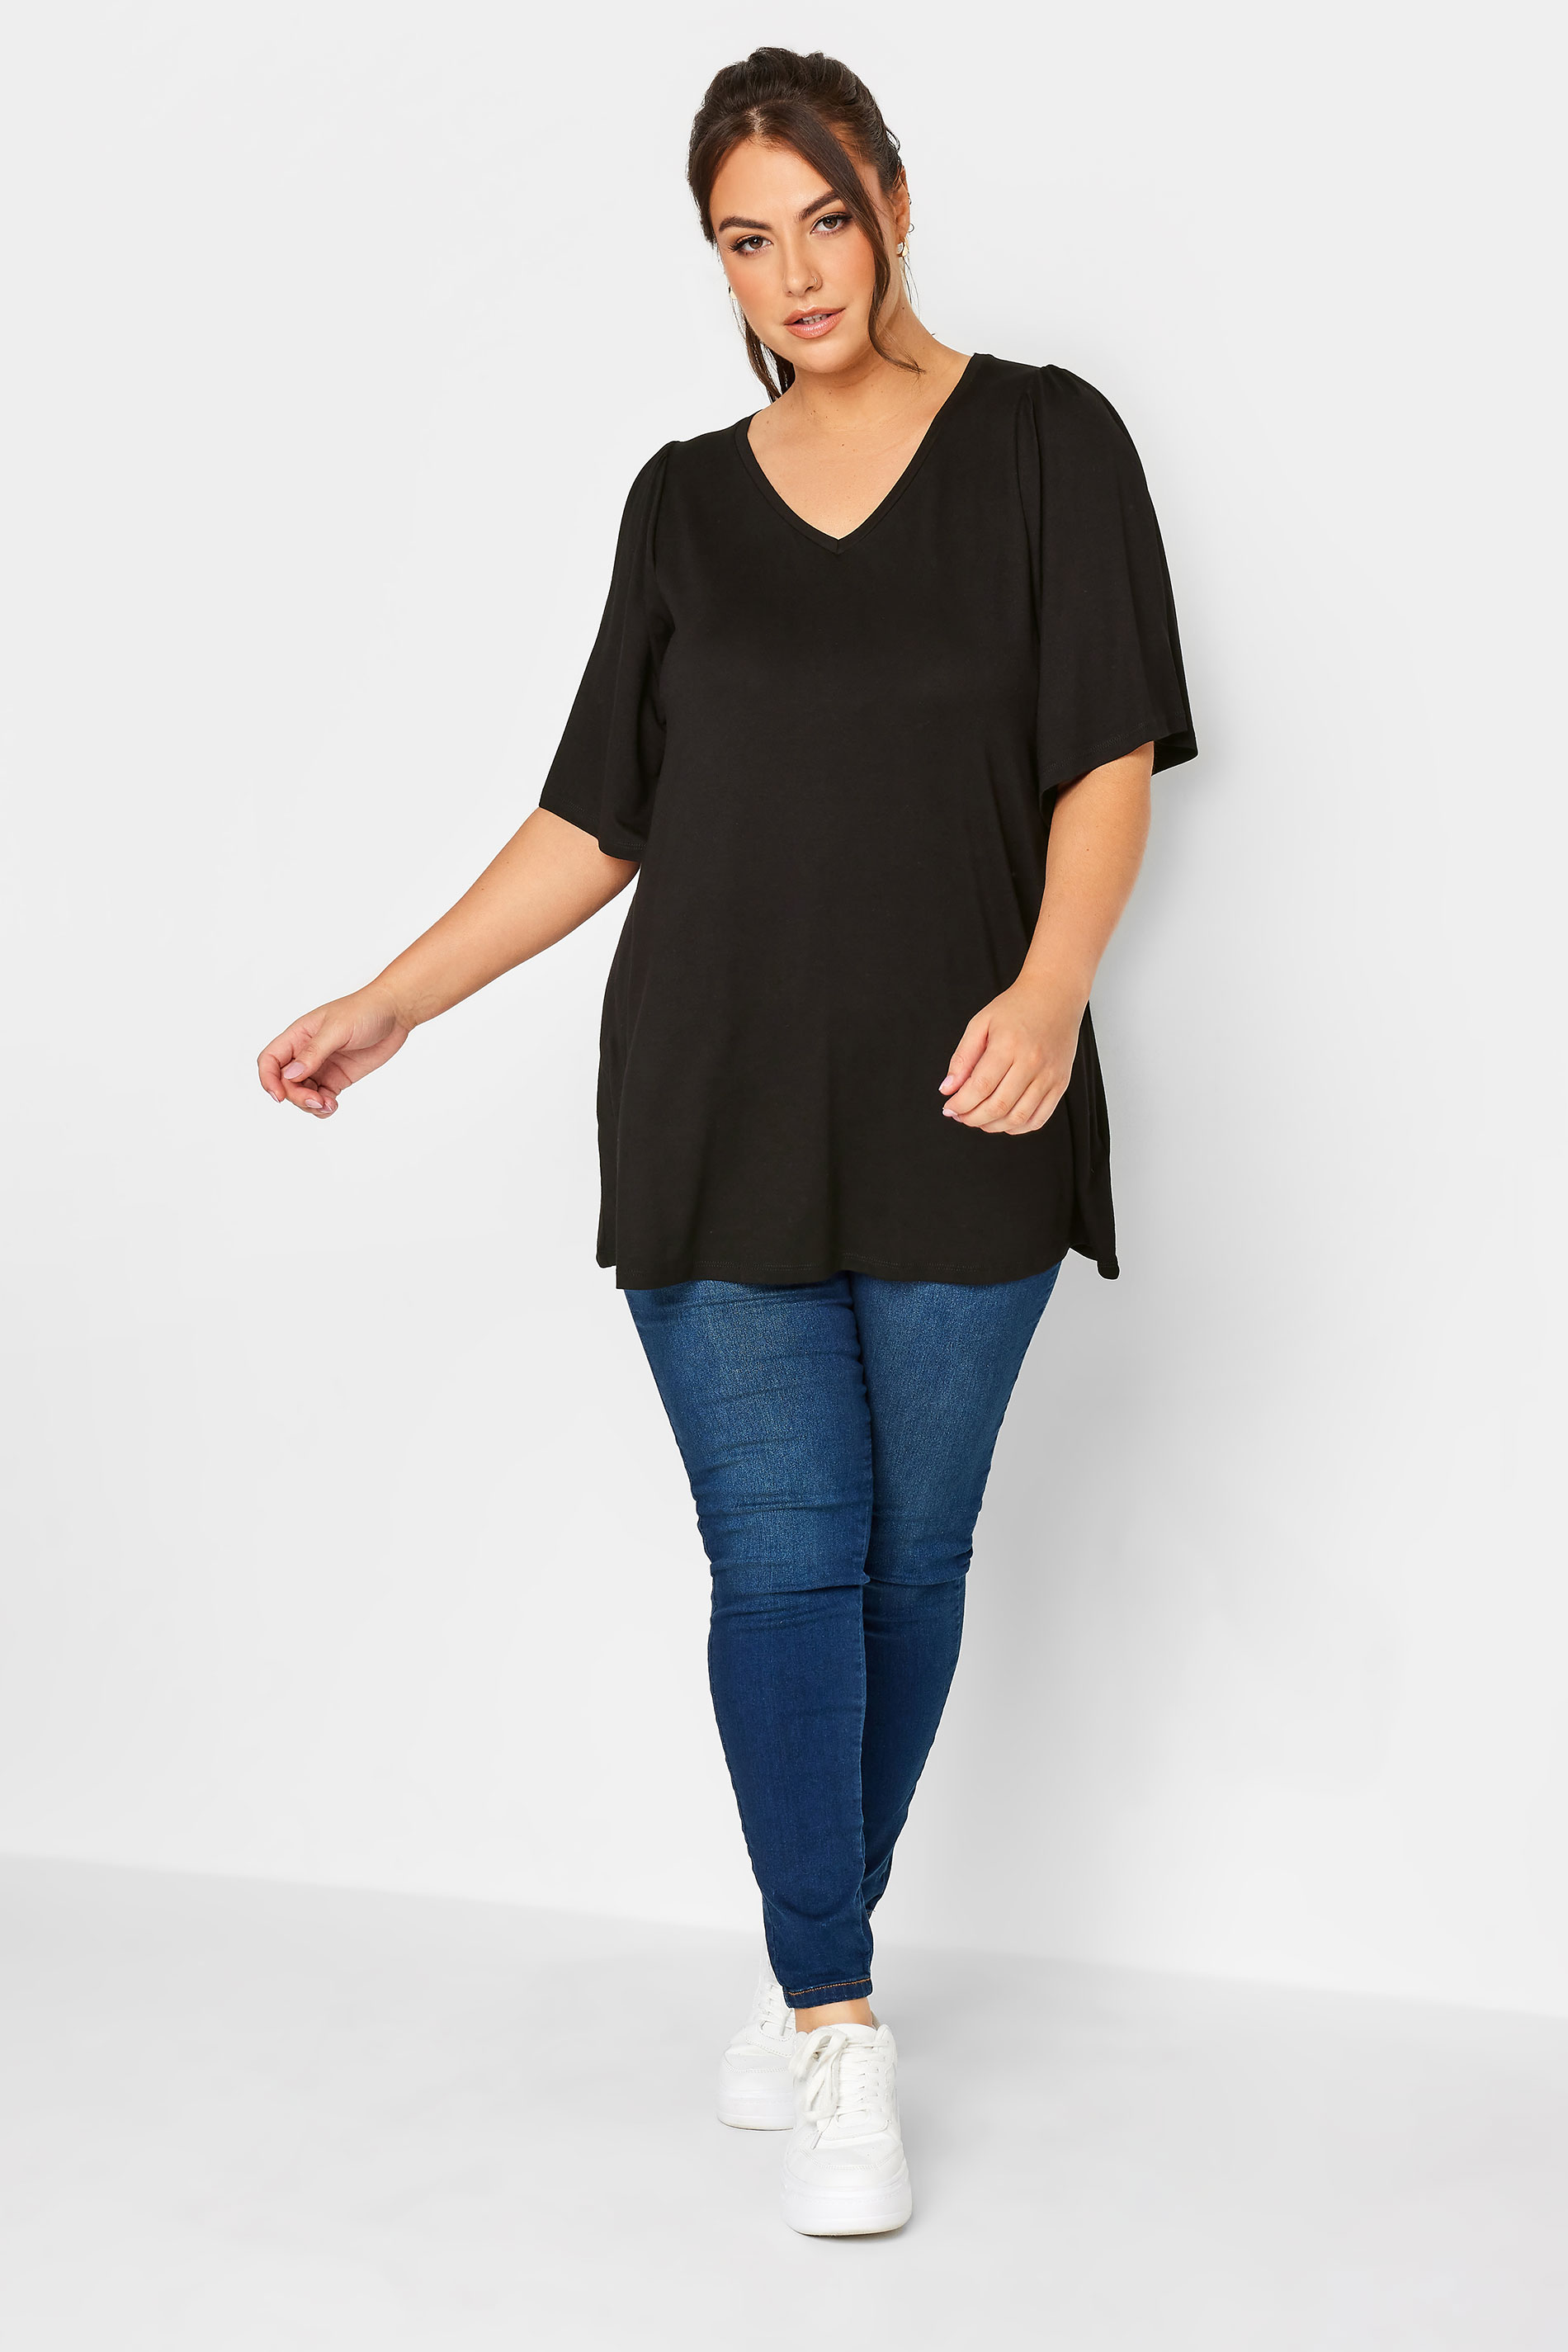 YOURS Plus Size Black Angel Sleeve Top | Yours Clothing  2